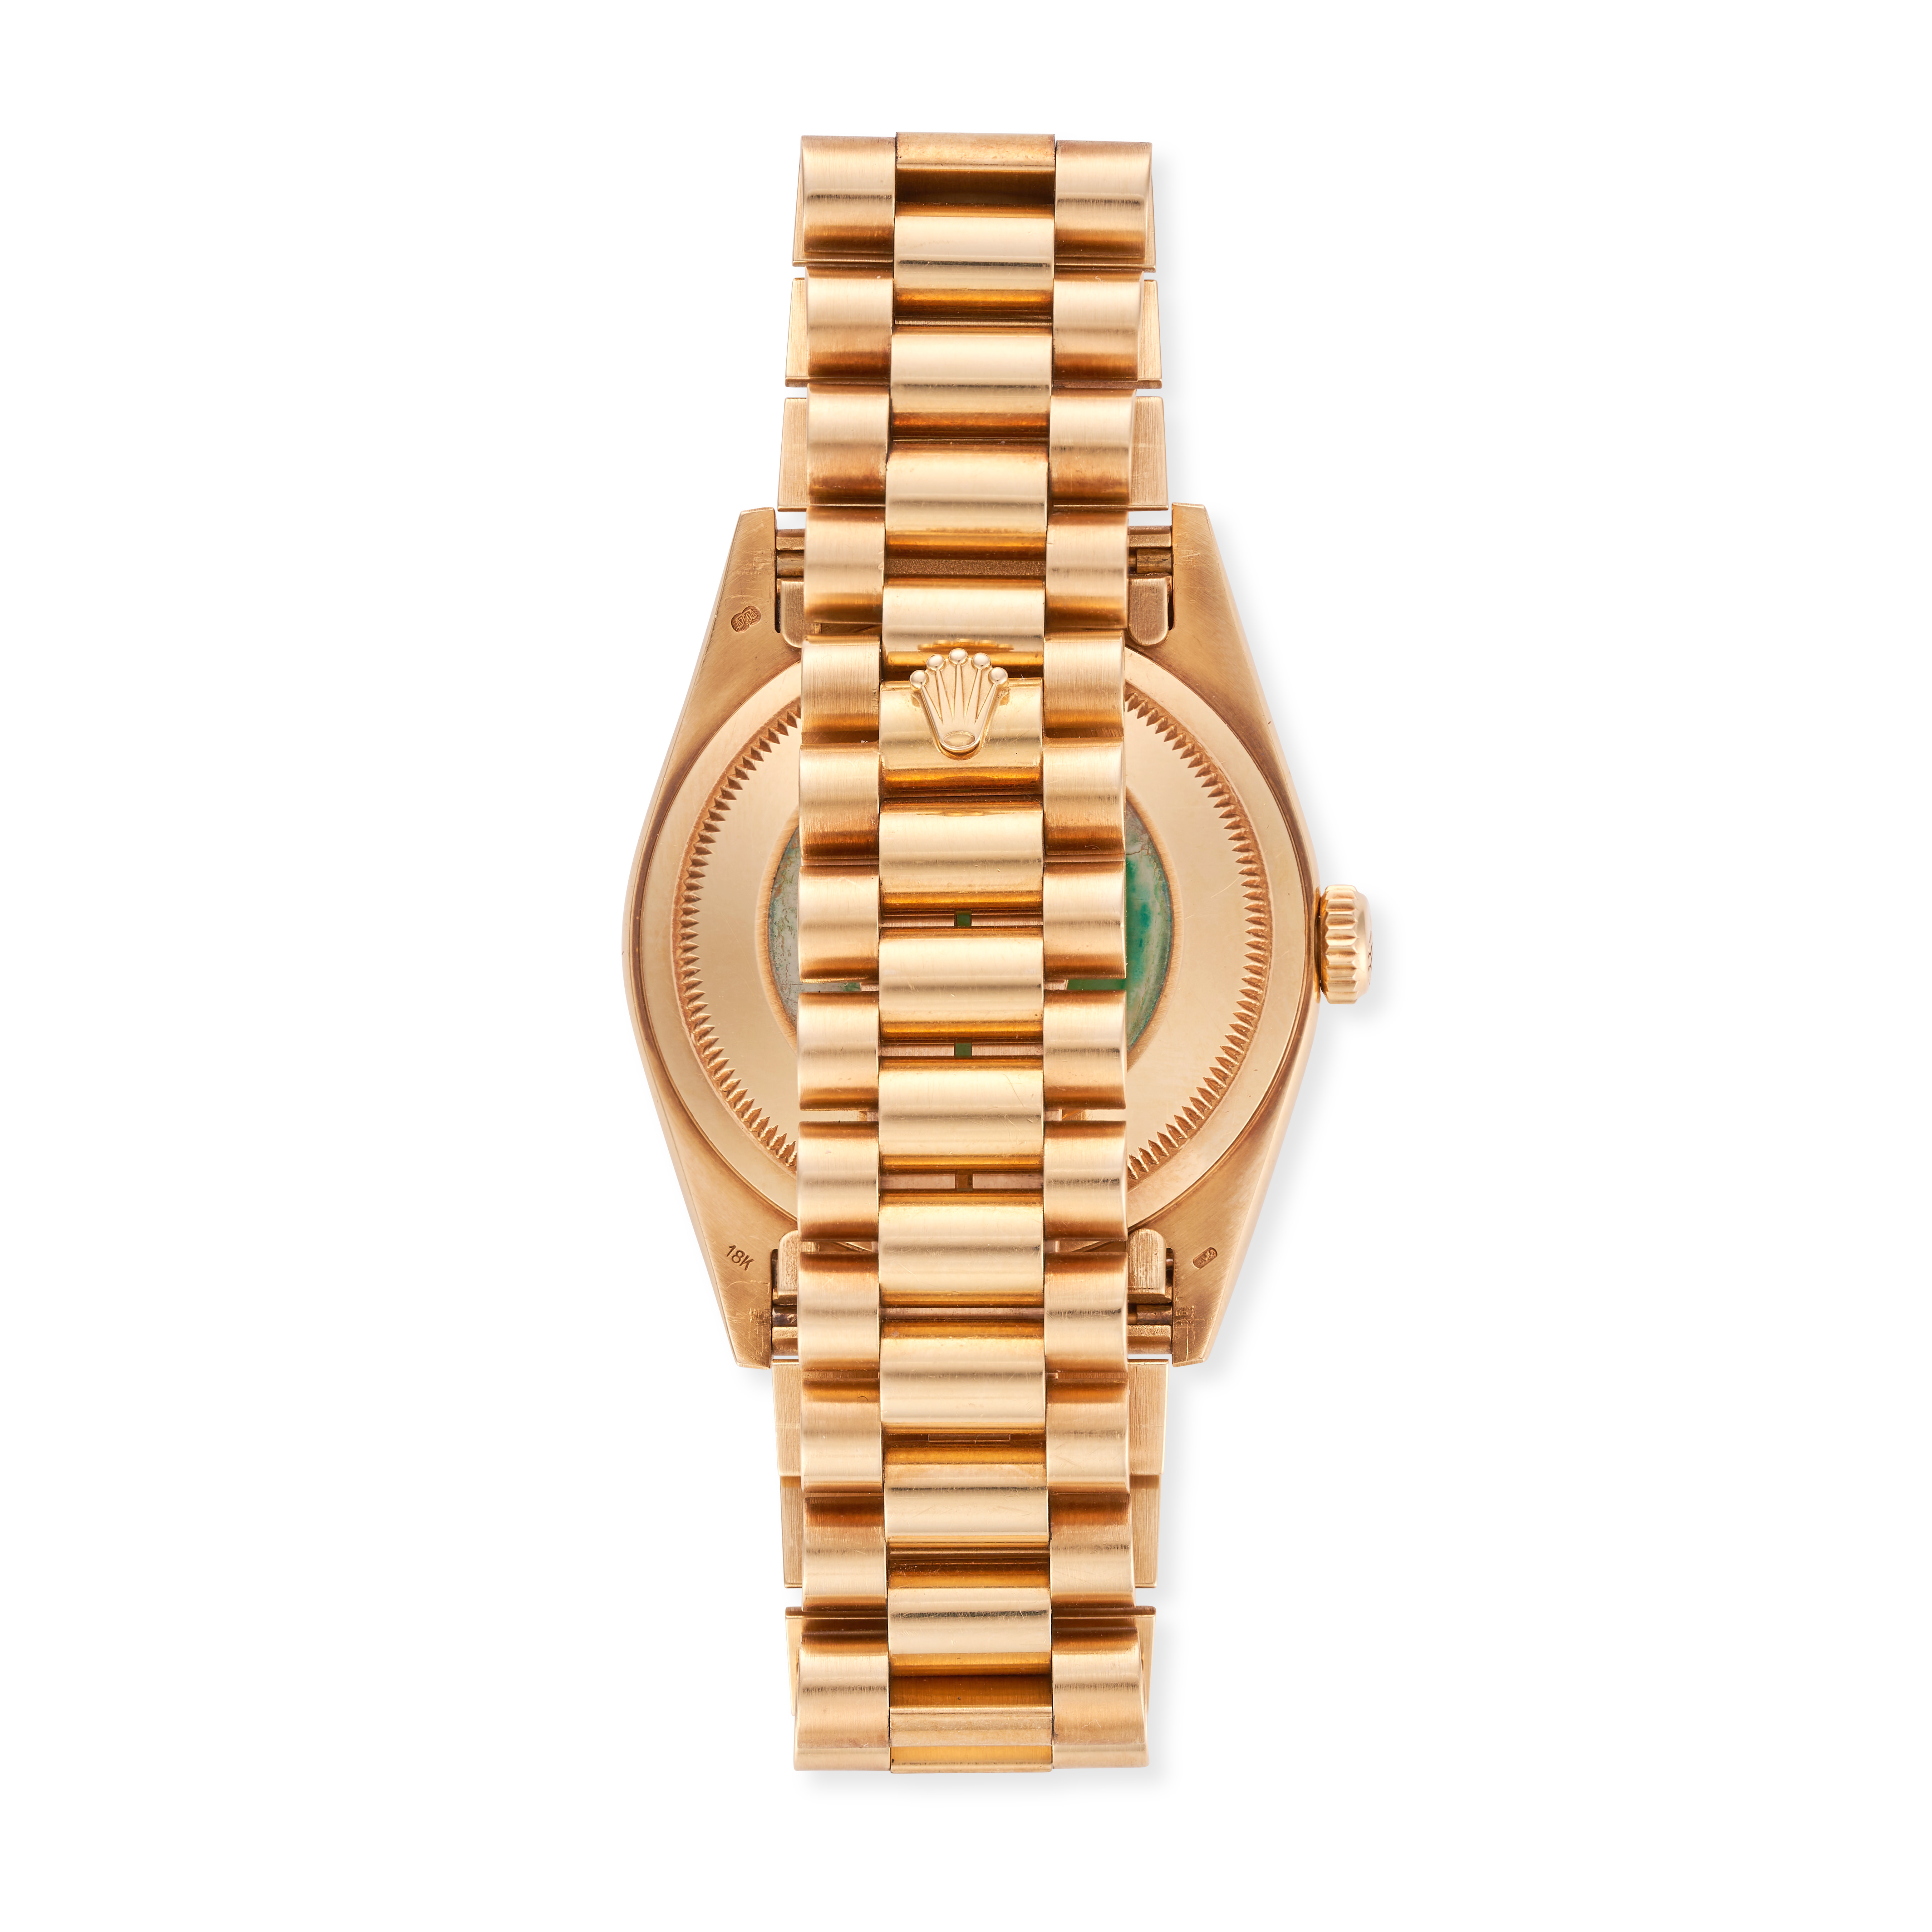 ROLEX, A DAY-DATE 36 WRISTWATCH in 18ct yellow gold, ref. 18238, E9XXXXX, circa 1990, gold fluted... - Image 2 of 3